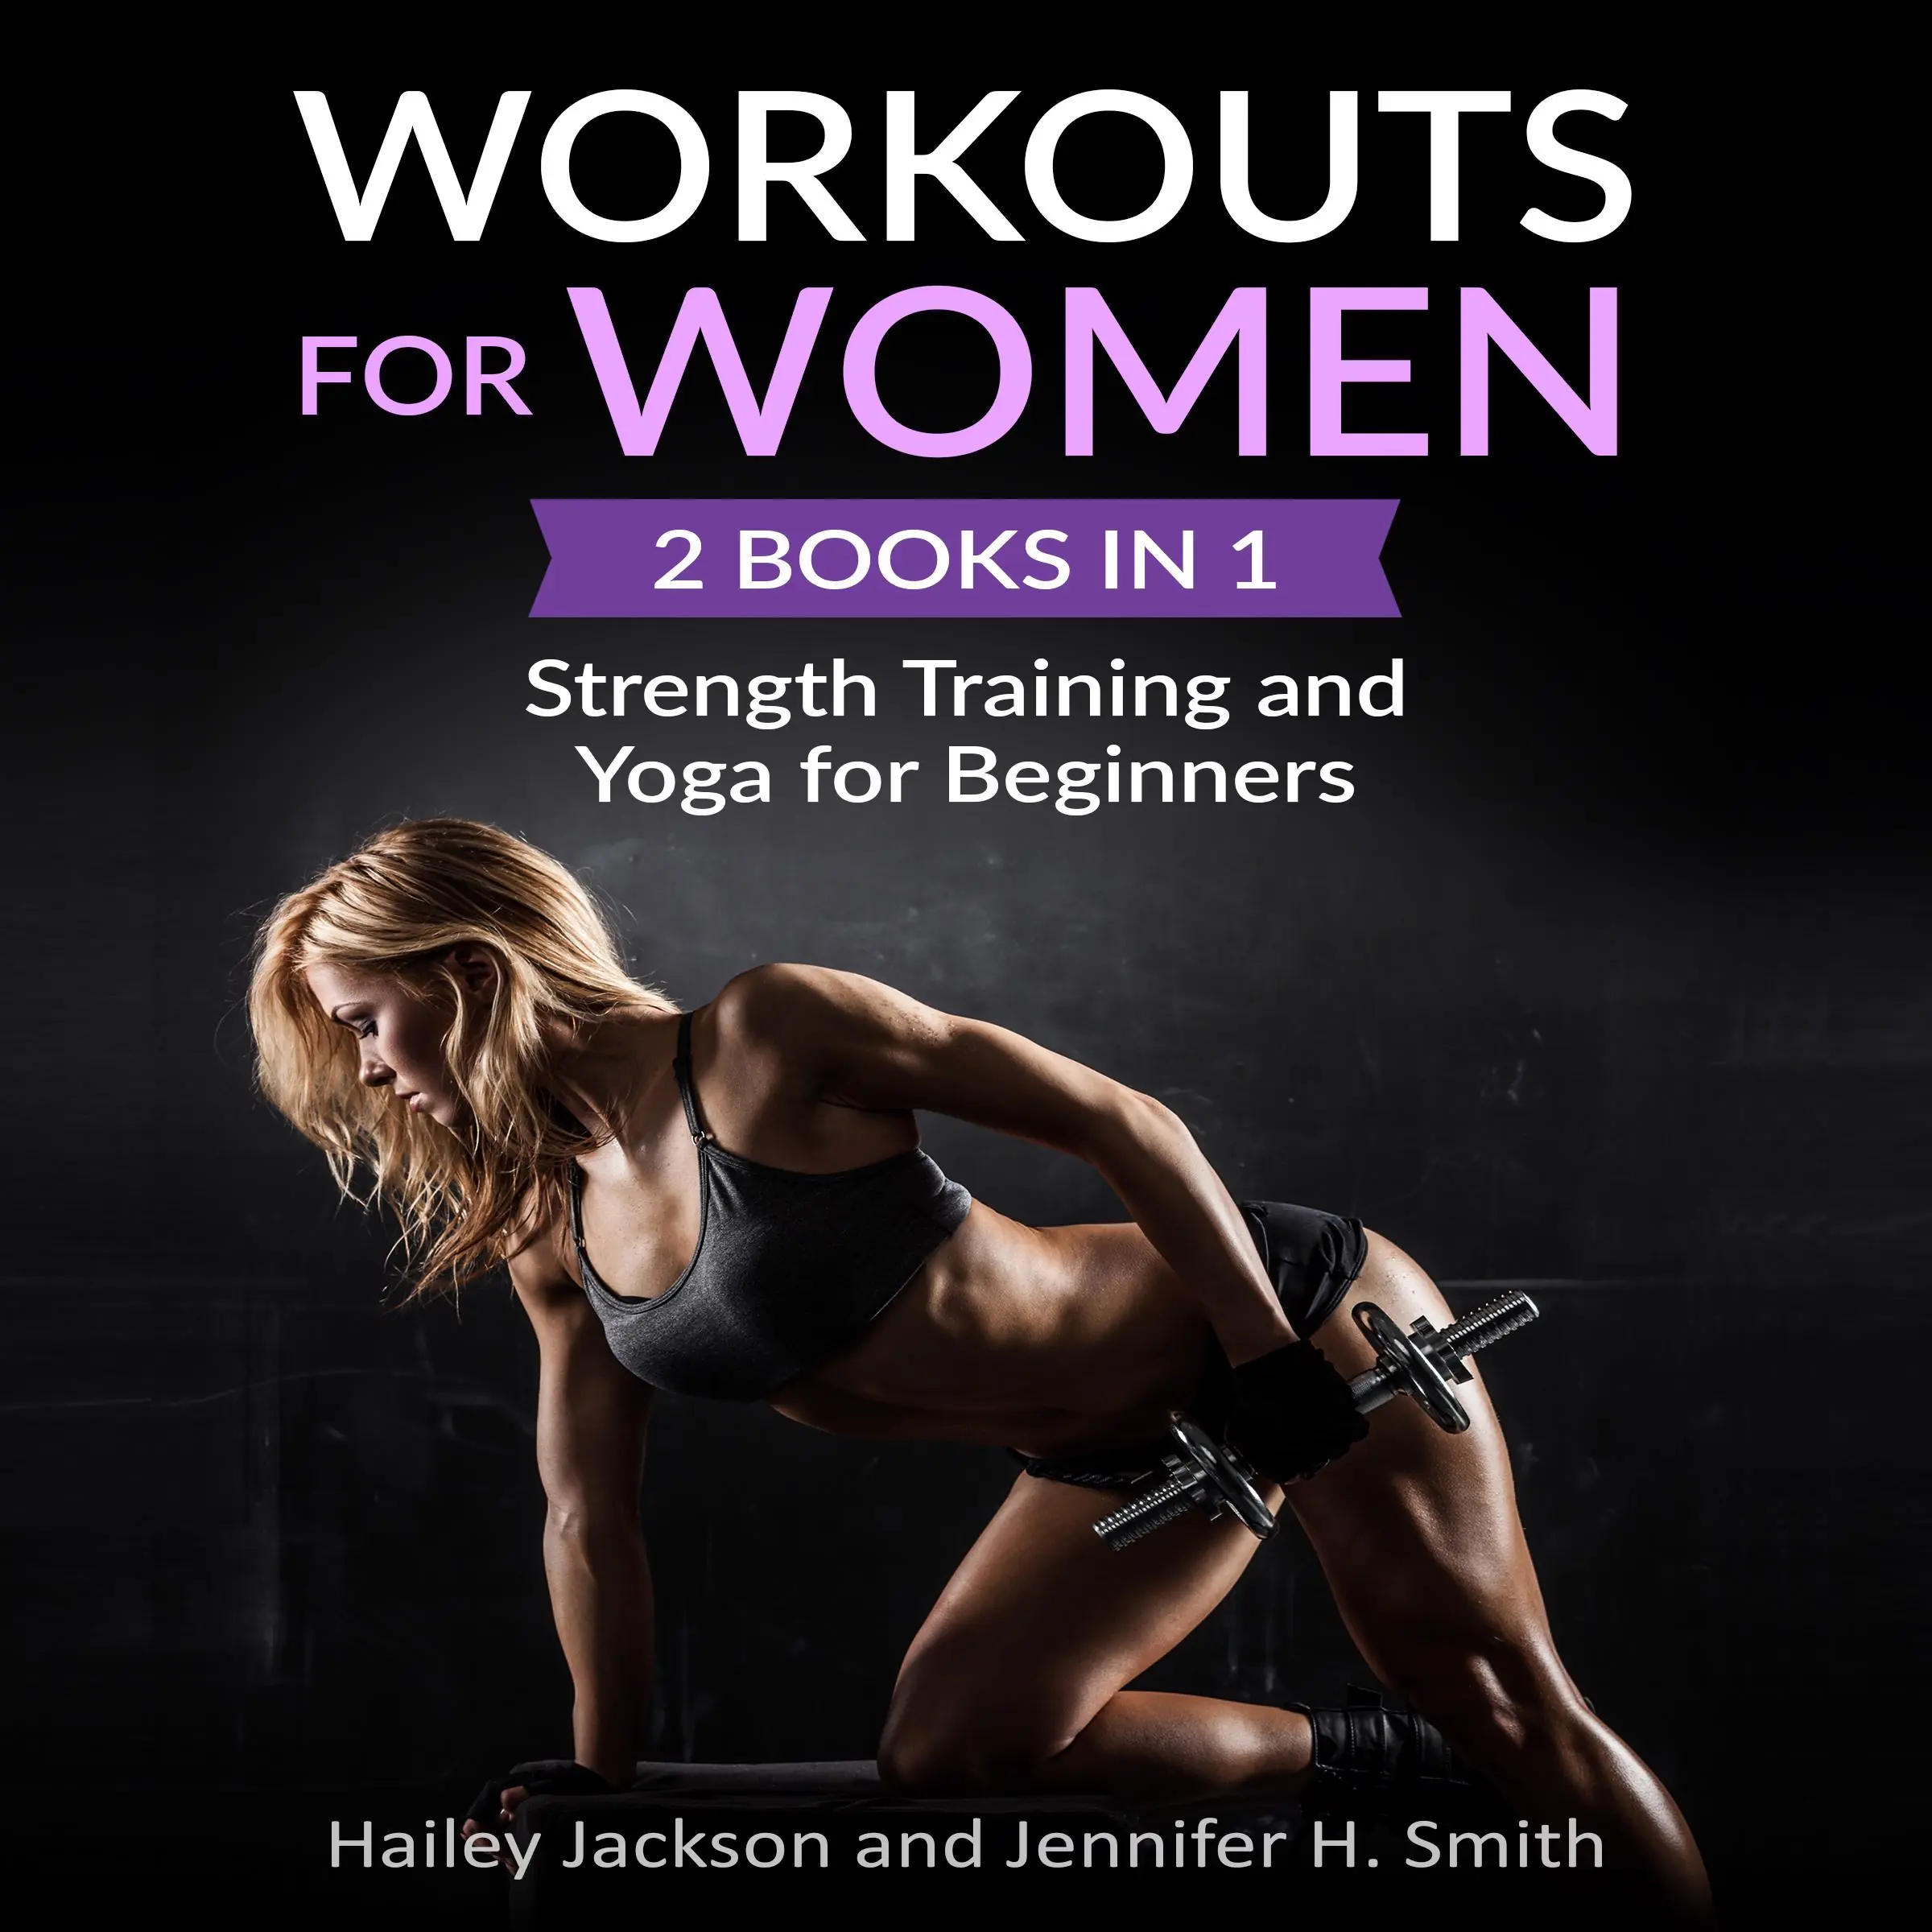 Workouts for Women: 2 Books in 1 Audiobook by Jennifer H. Smith